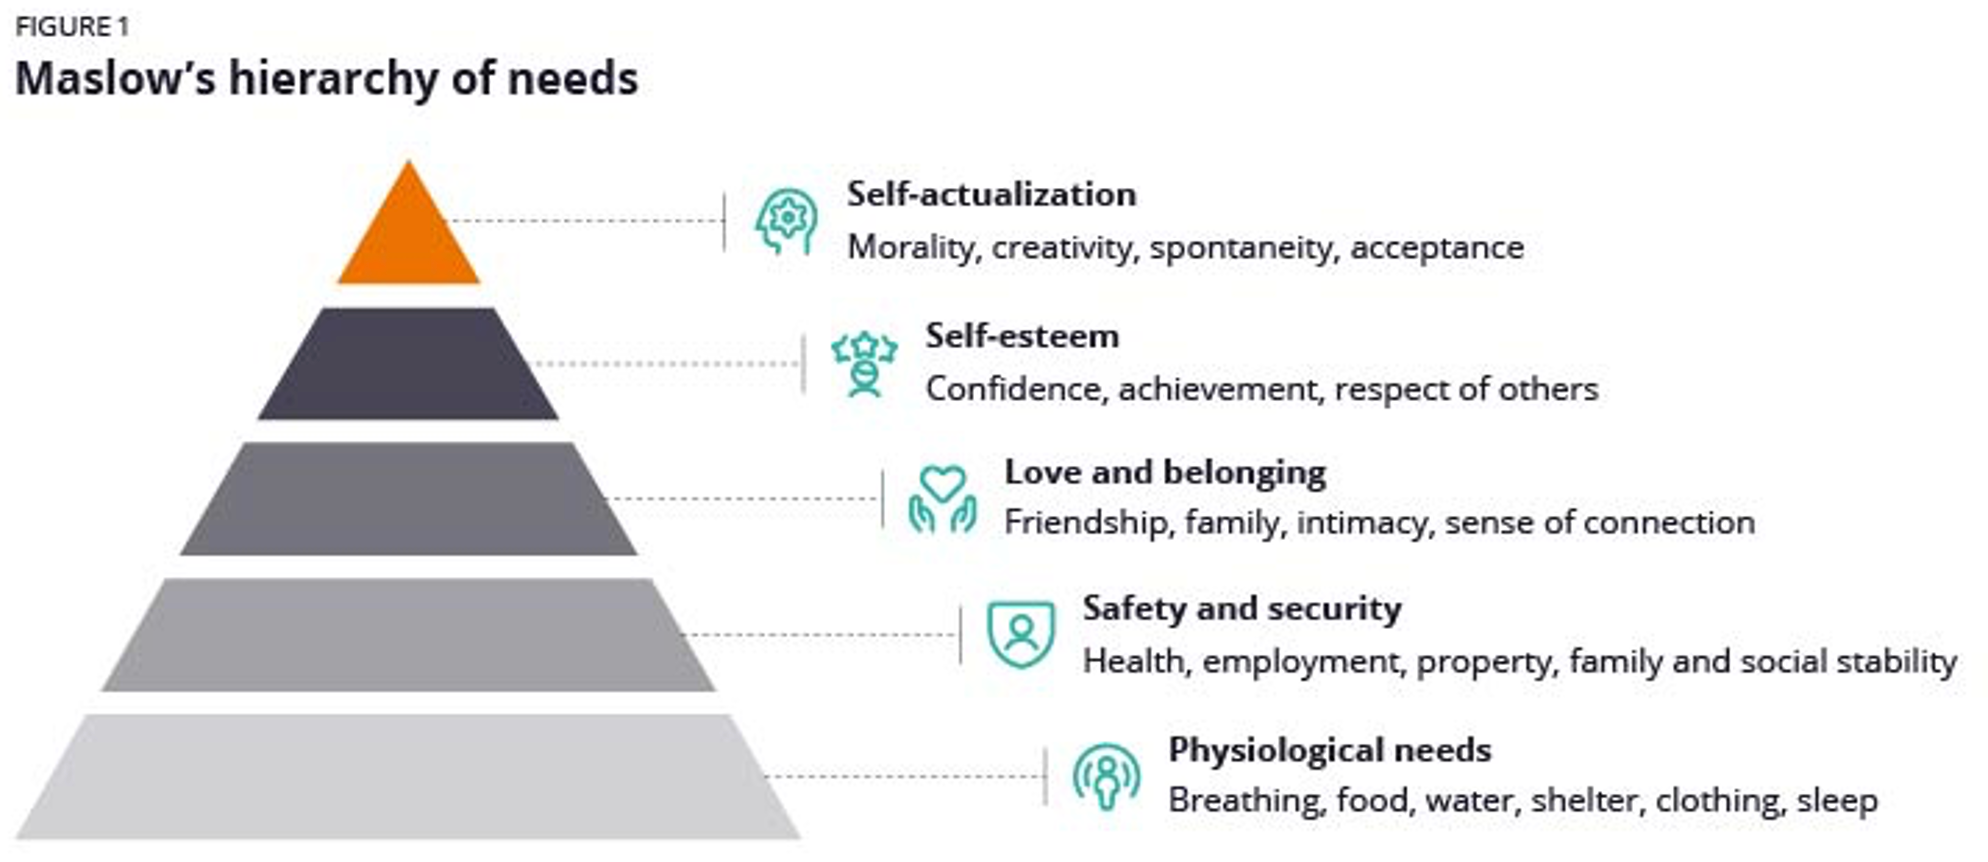 FIGURE 1: Maslow’s hierarchy of needs